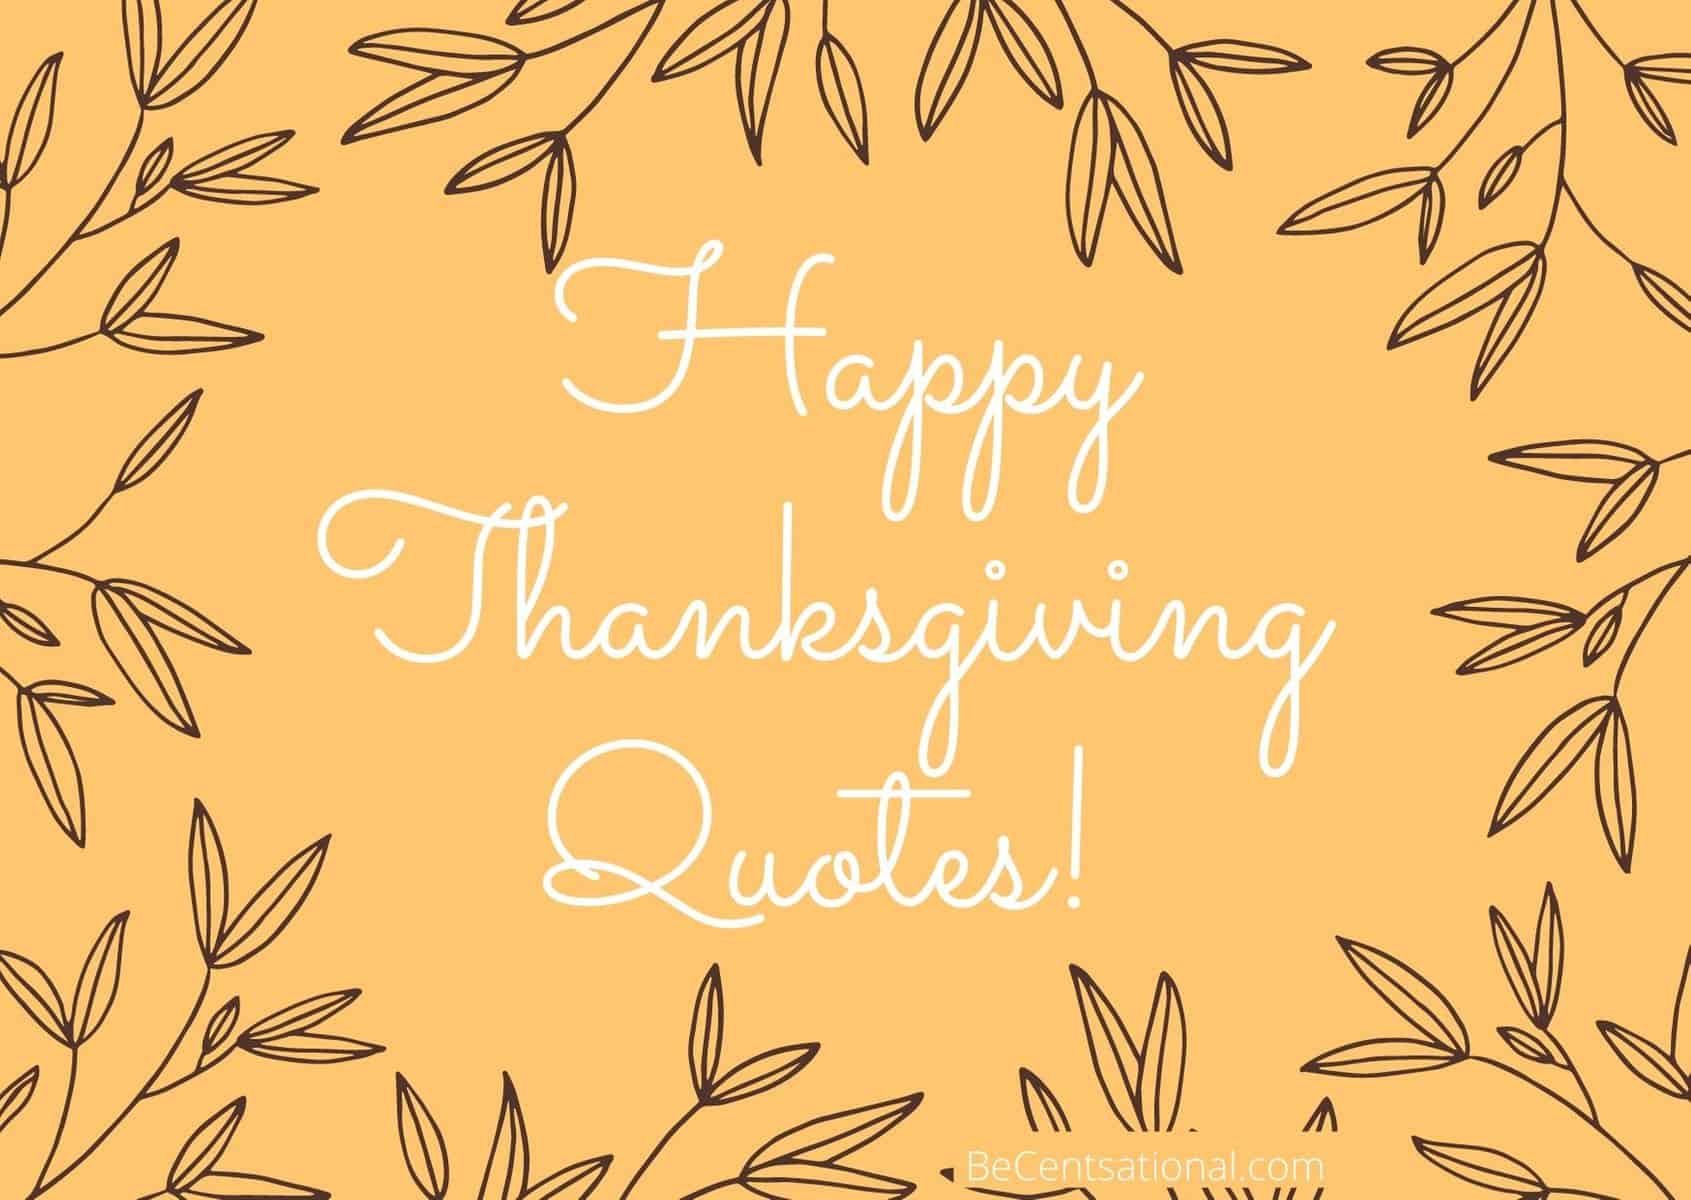 100 Happy Thanksgiving Quotes, Messages, and Wishes!